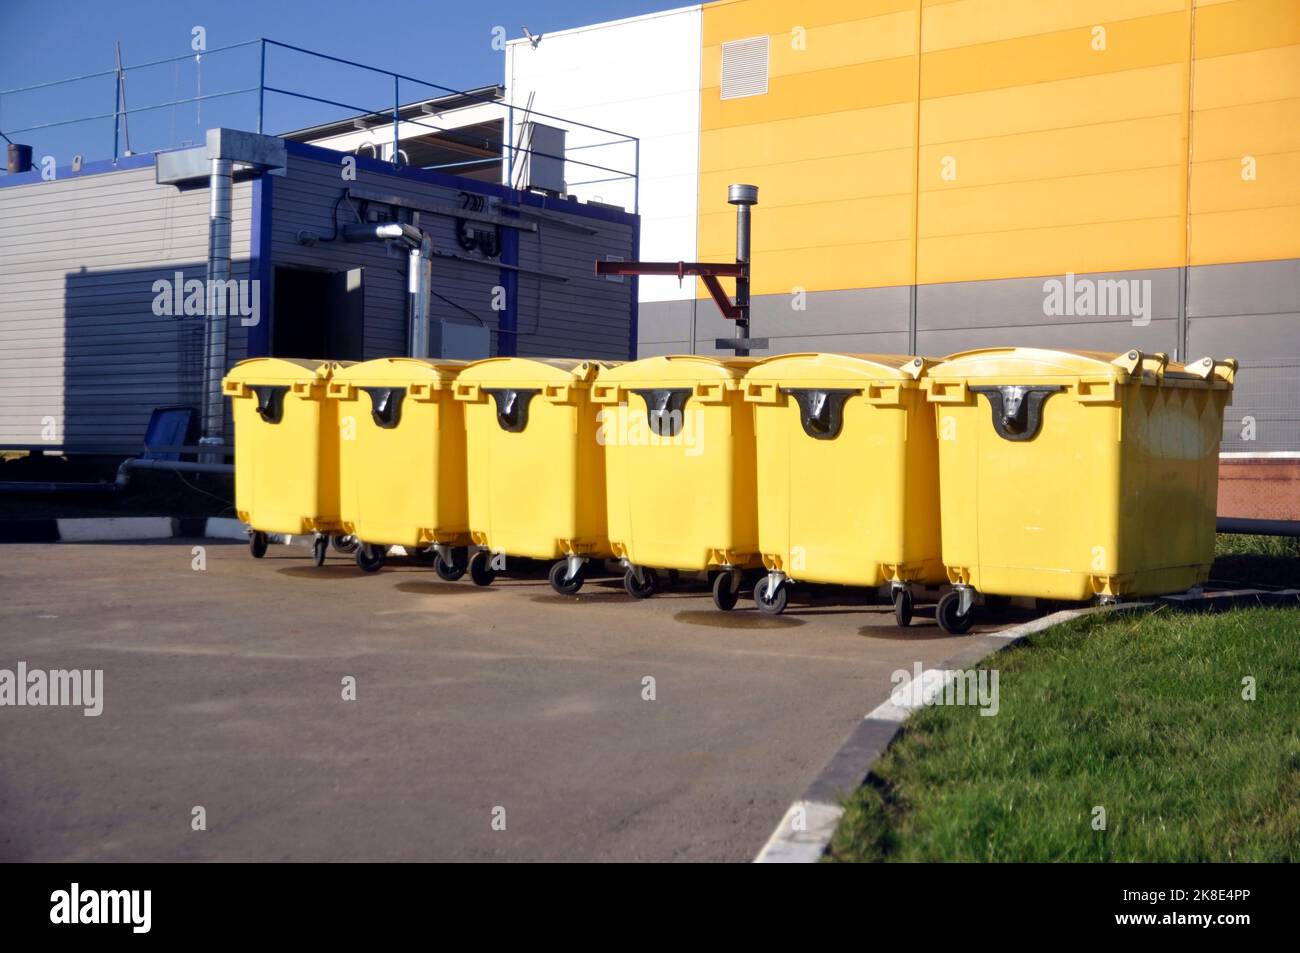 https://c8.alamy.com/comp/2K8E4PP/yellow-trash-cans-on-wheels-for-organized-waste-collection-2K8E4PP.jpg